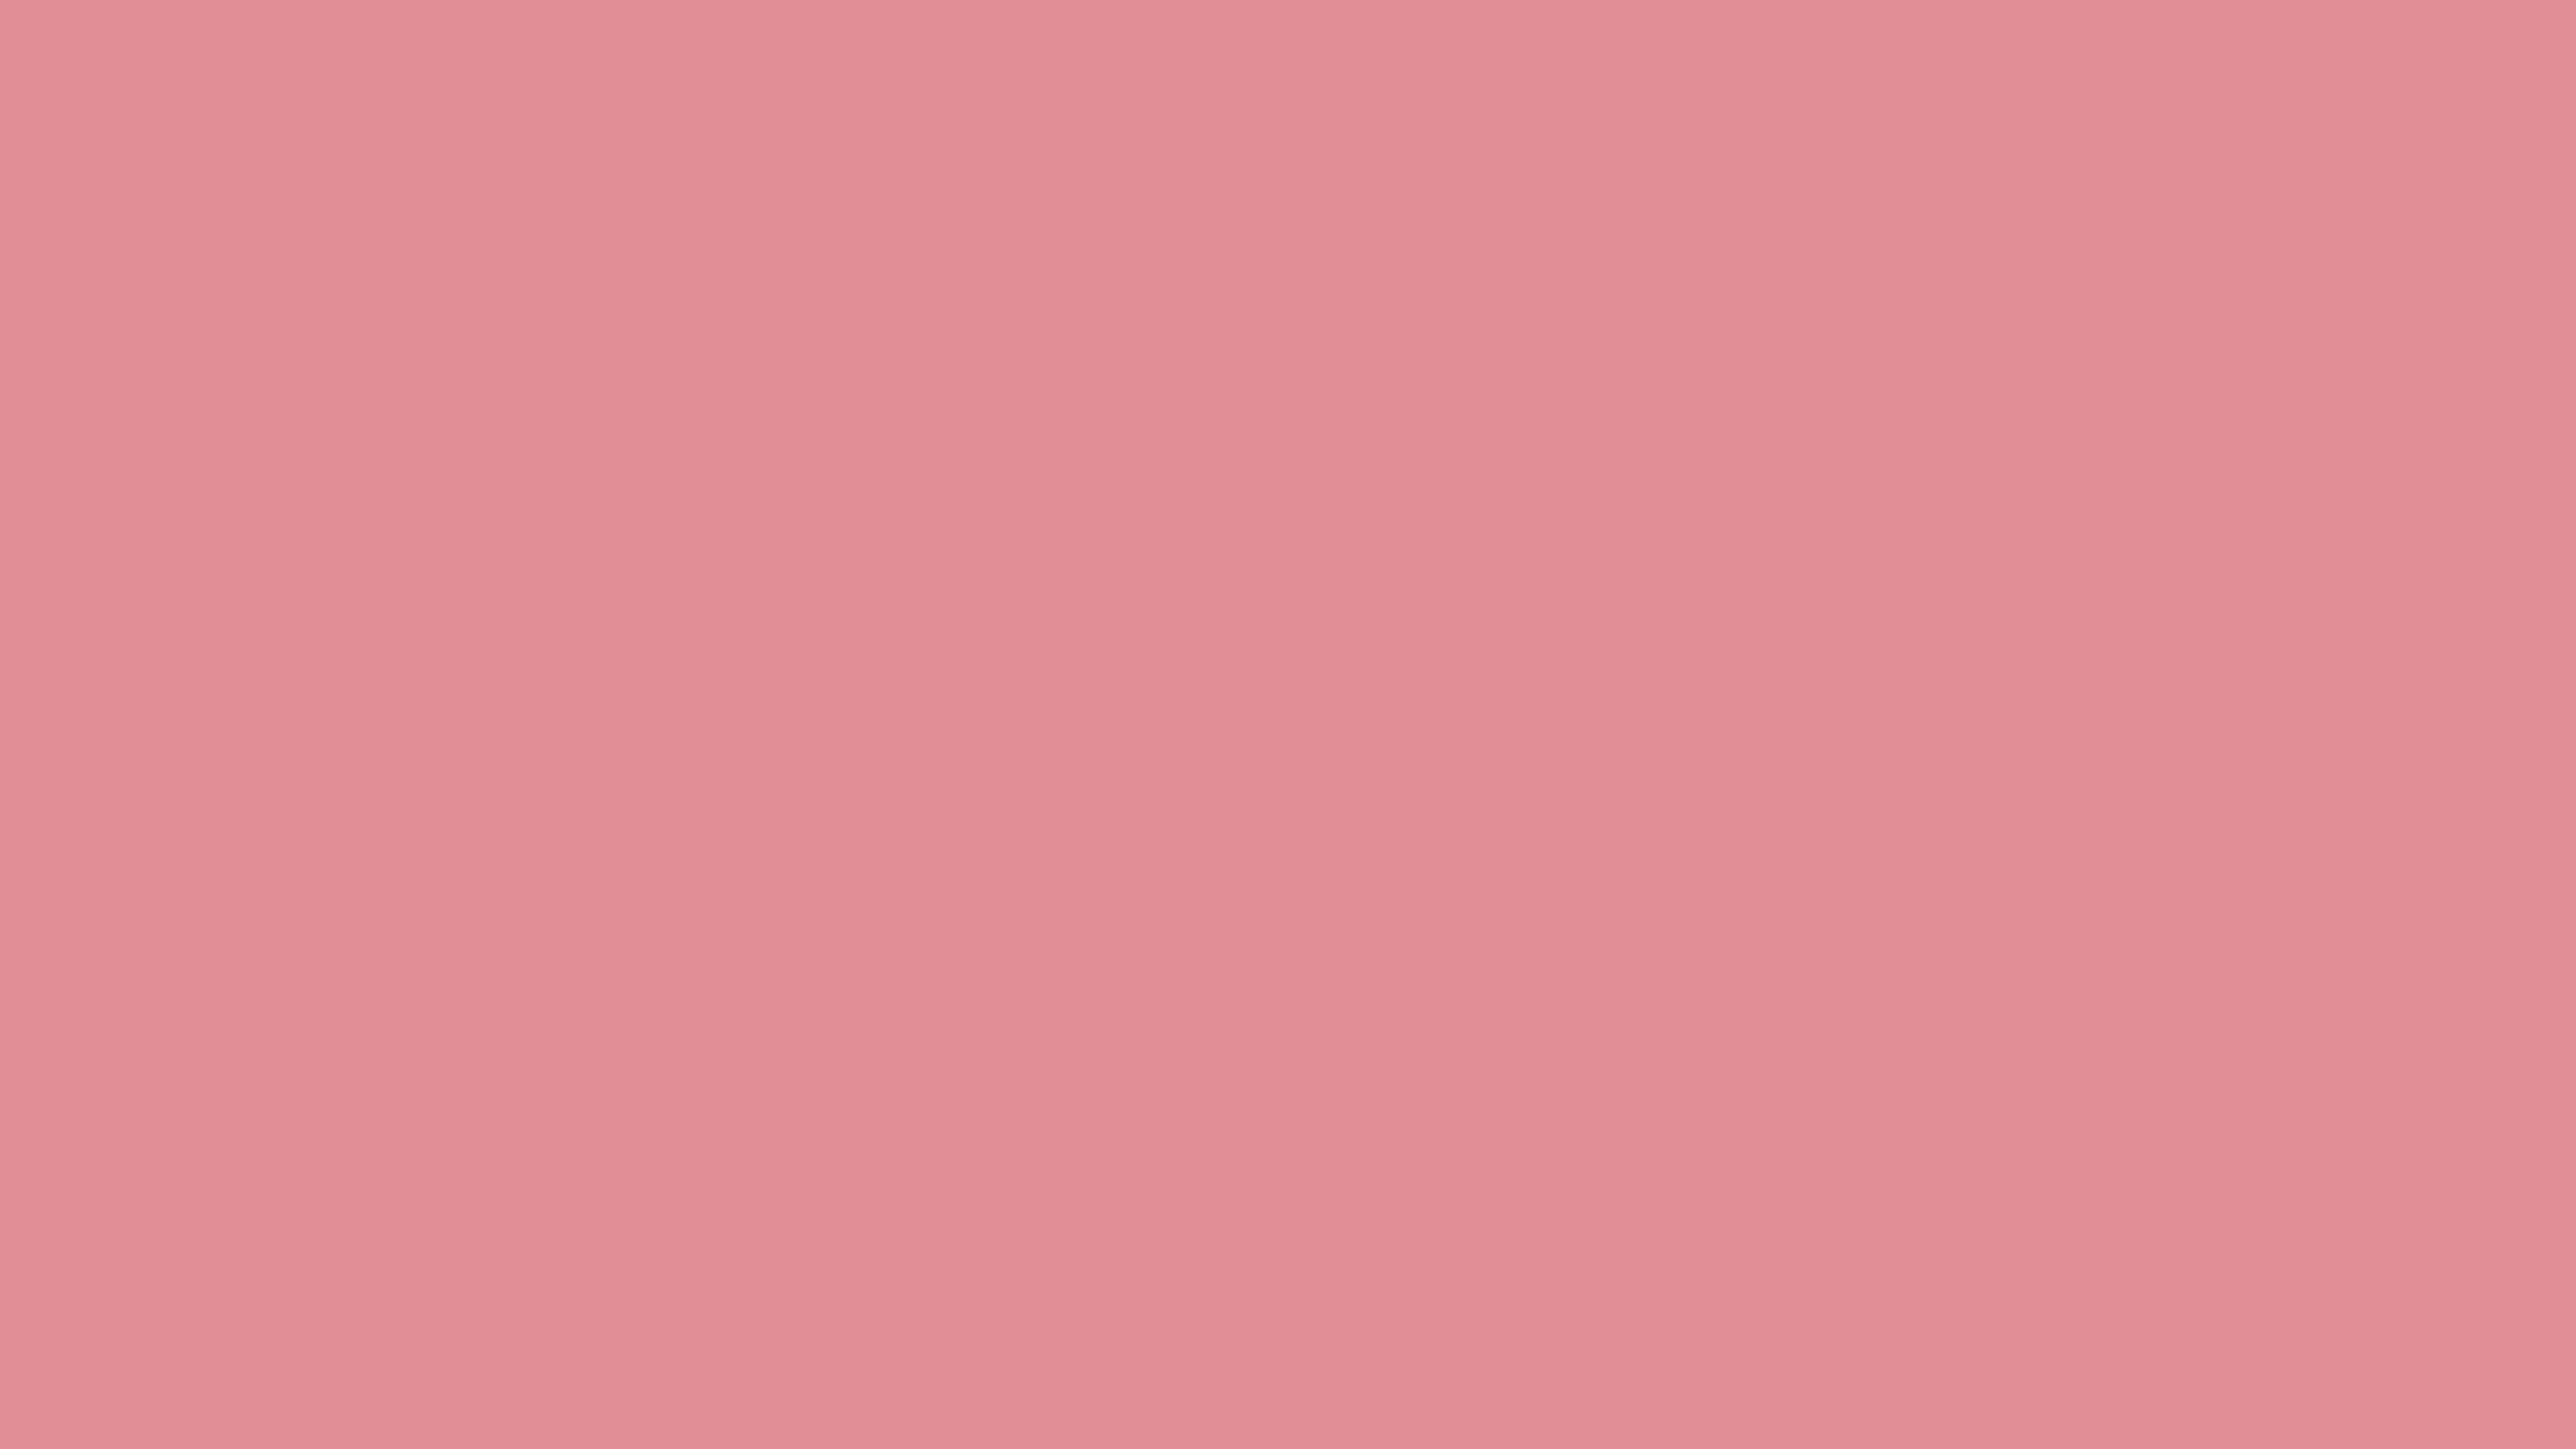 7680x4320 Ruddy Pink Solid Color Background